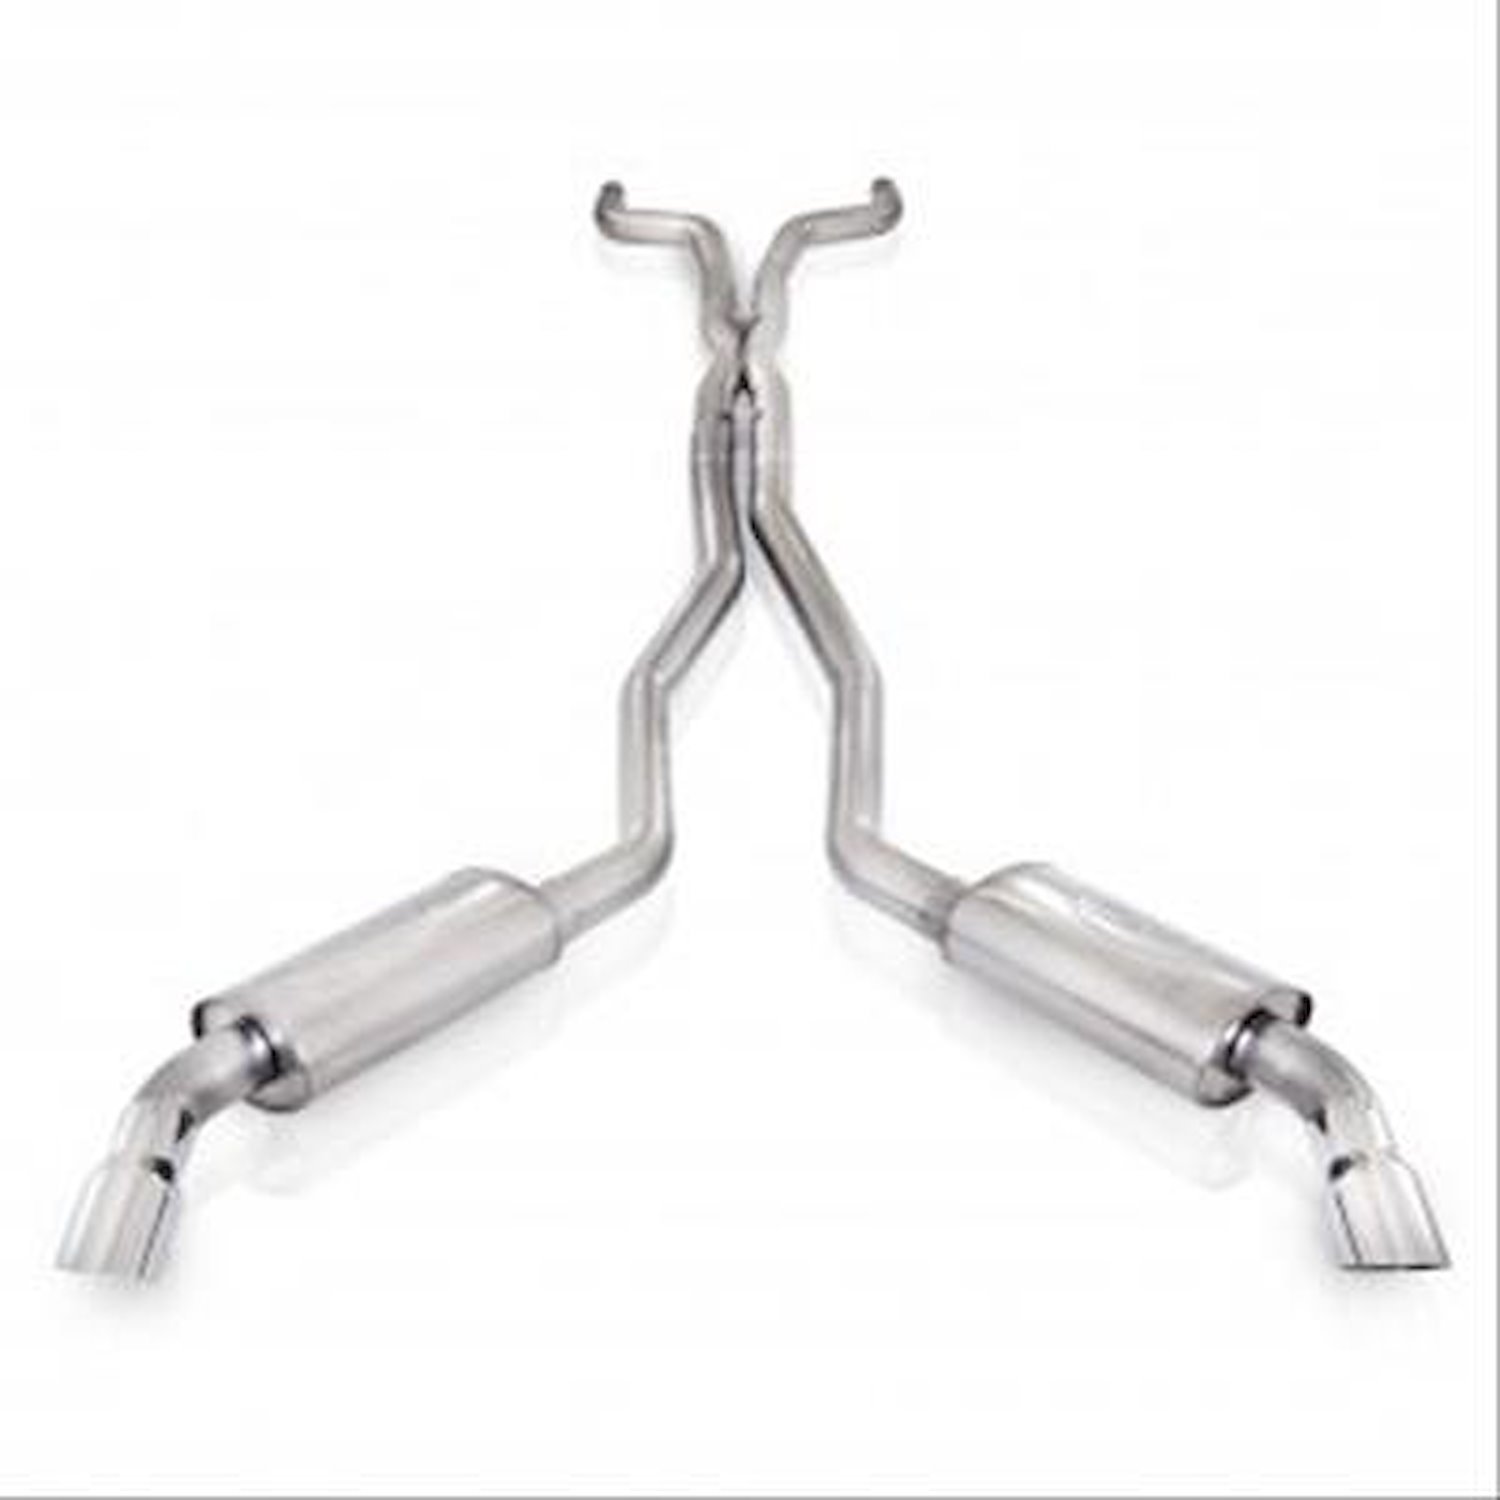 2010+ Camaro 6.2L 304 SS CNC mandrel bent 3 dual exhaust system with x-pipe dual turbo chambered muf